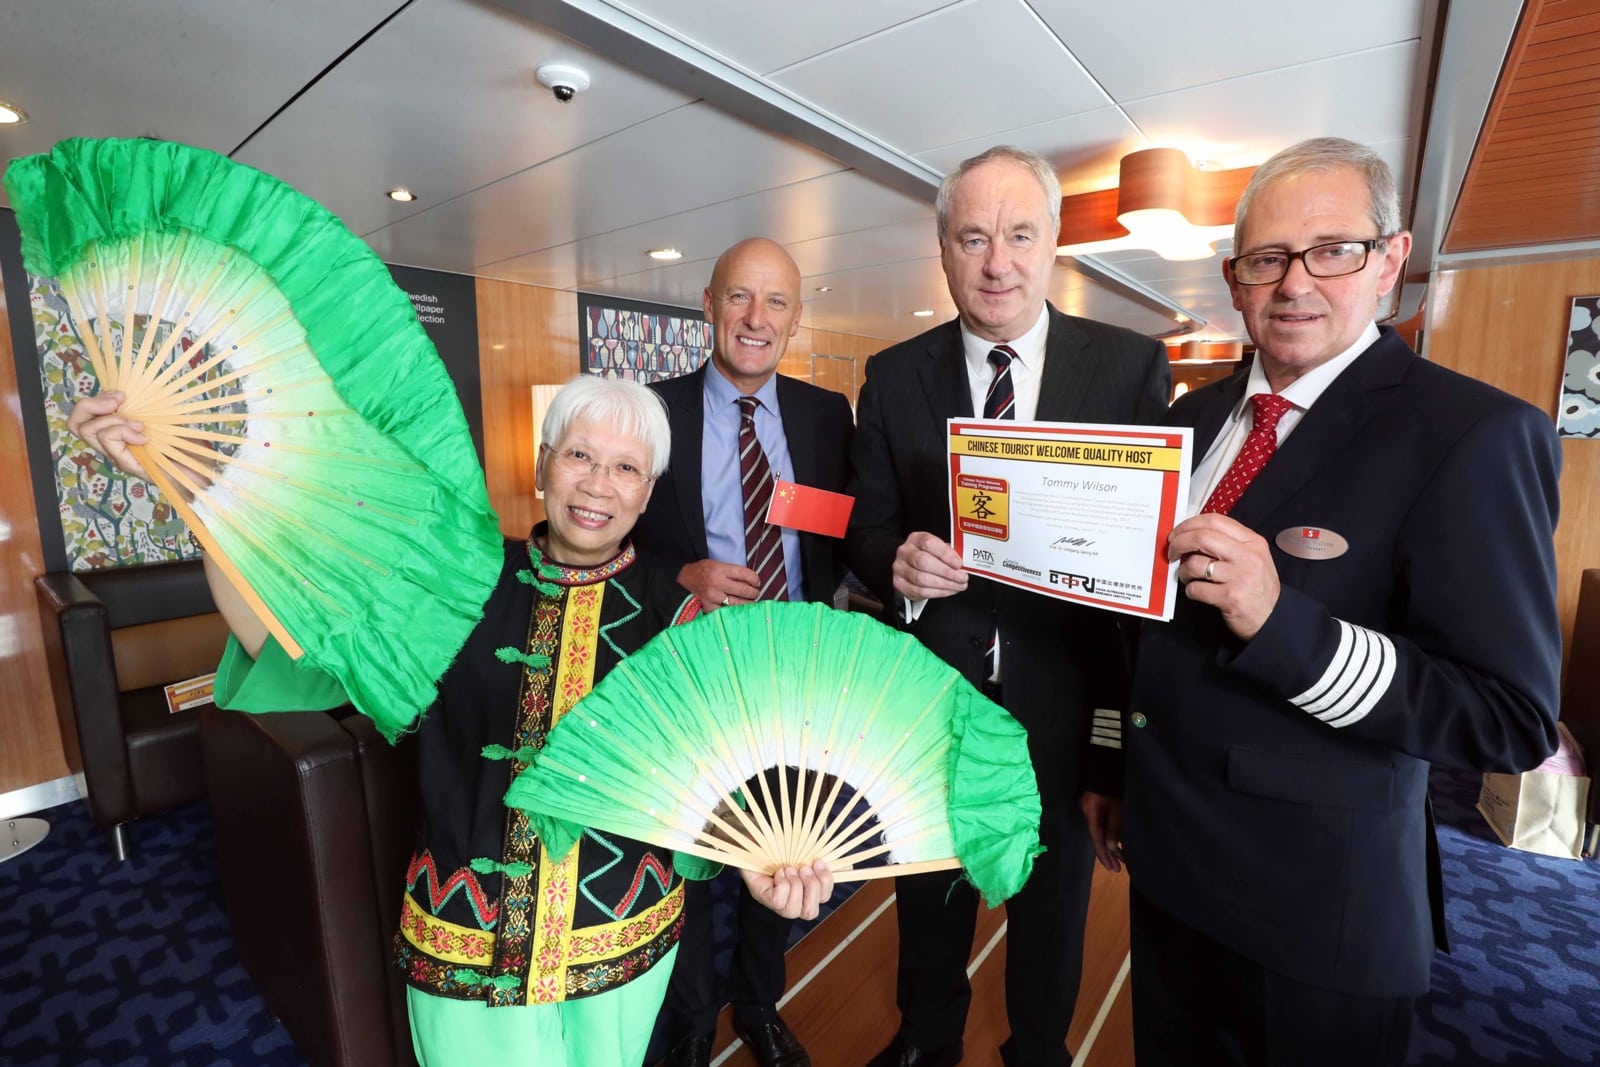 Ferry company first in Europe to receive the Chinese Tourist Welcome Certification Leading ferry company, Stena Line, has become the first passenger ferry company in Europe to achieve the Chinese Tourist Welcome (CTW) Certification which is officially recognised by tour operators in China and Europe. Stena Line